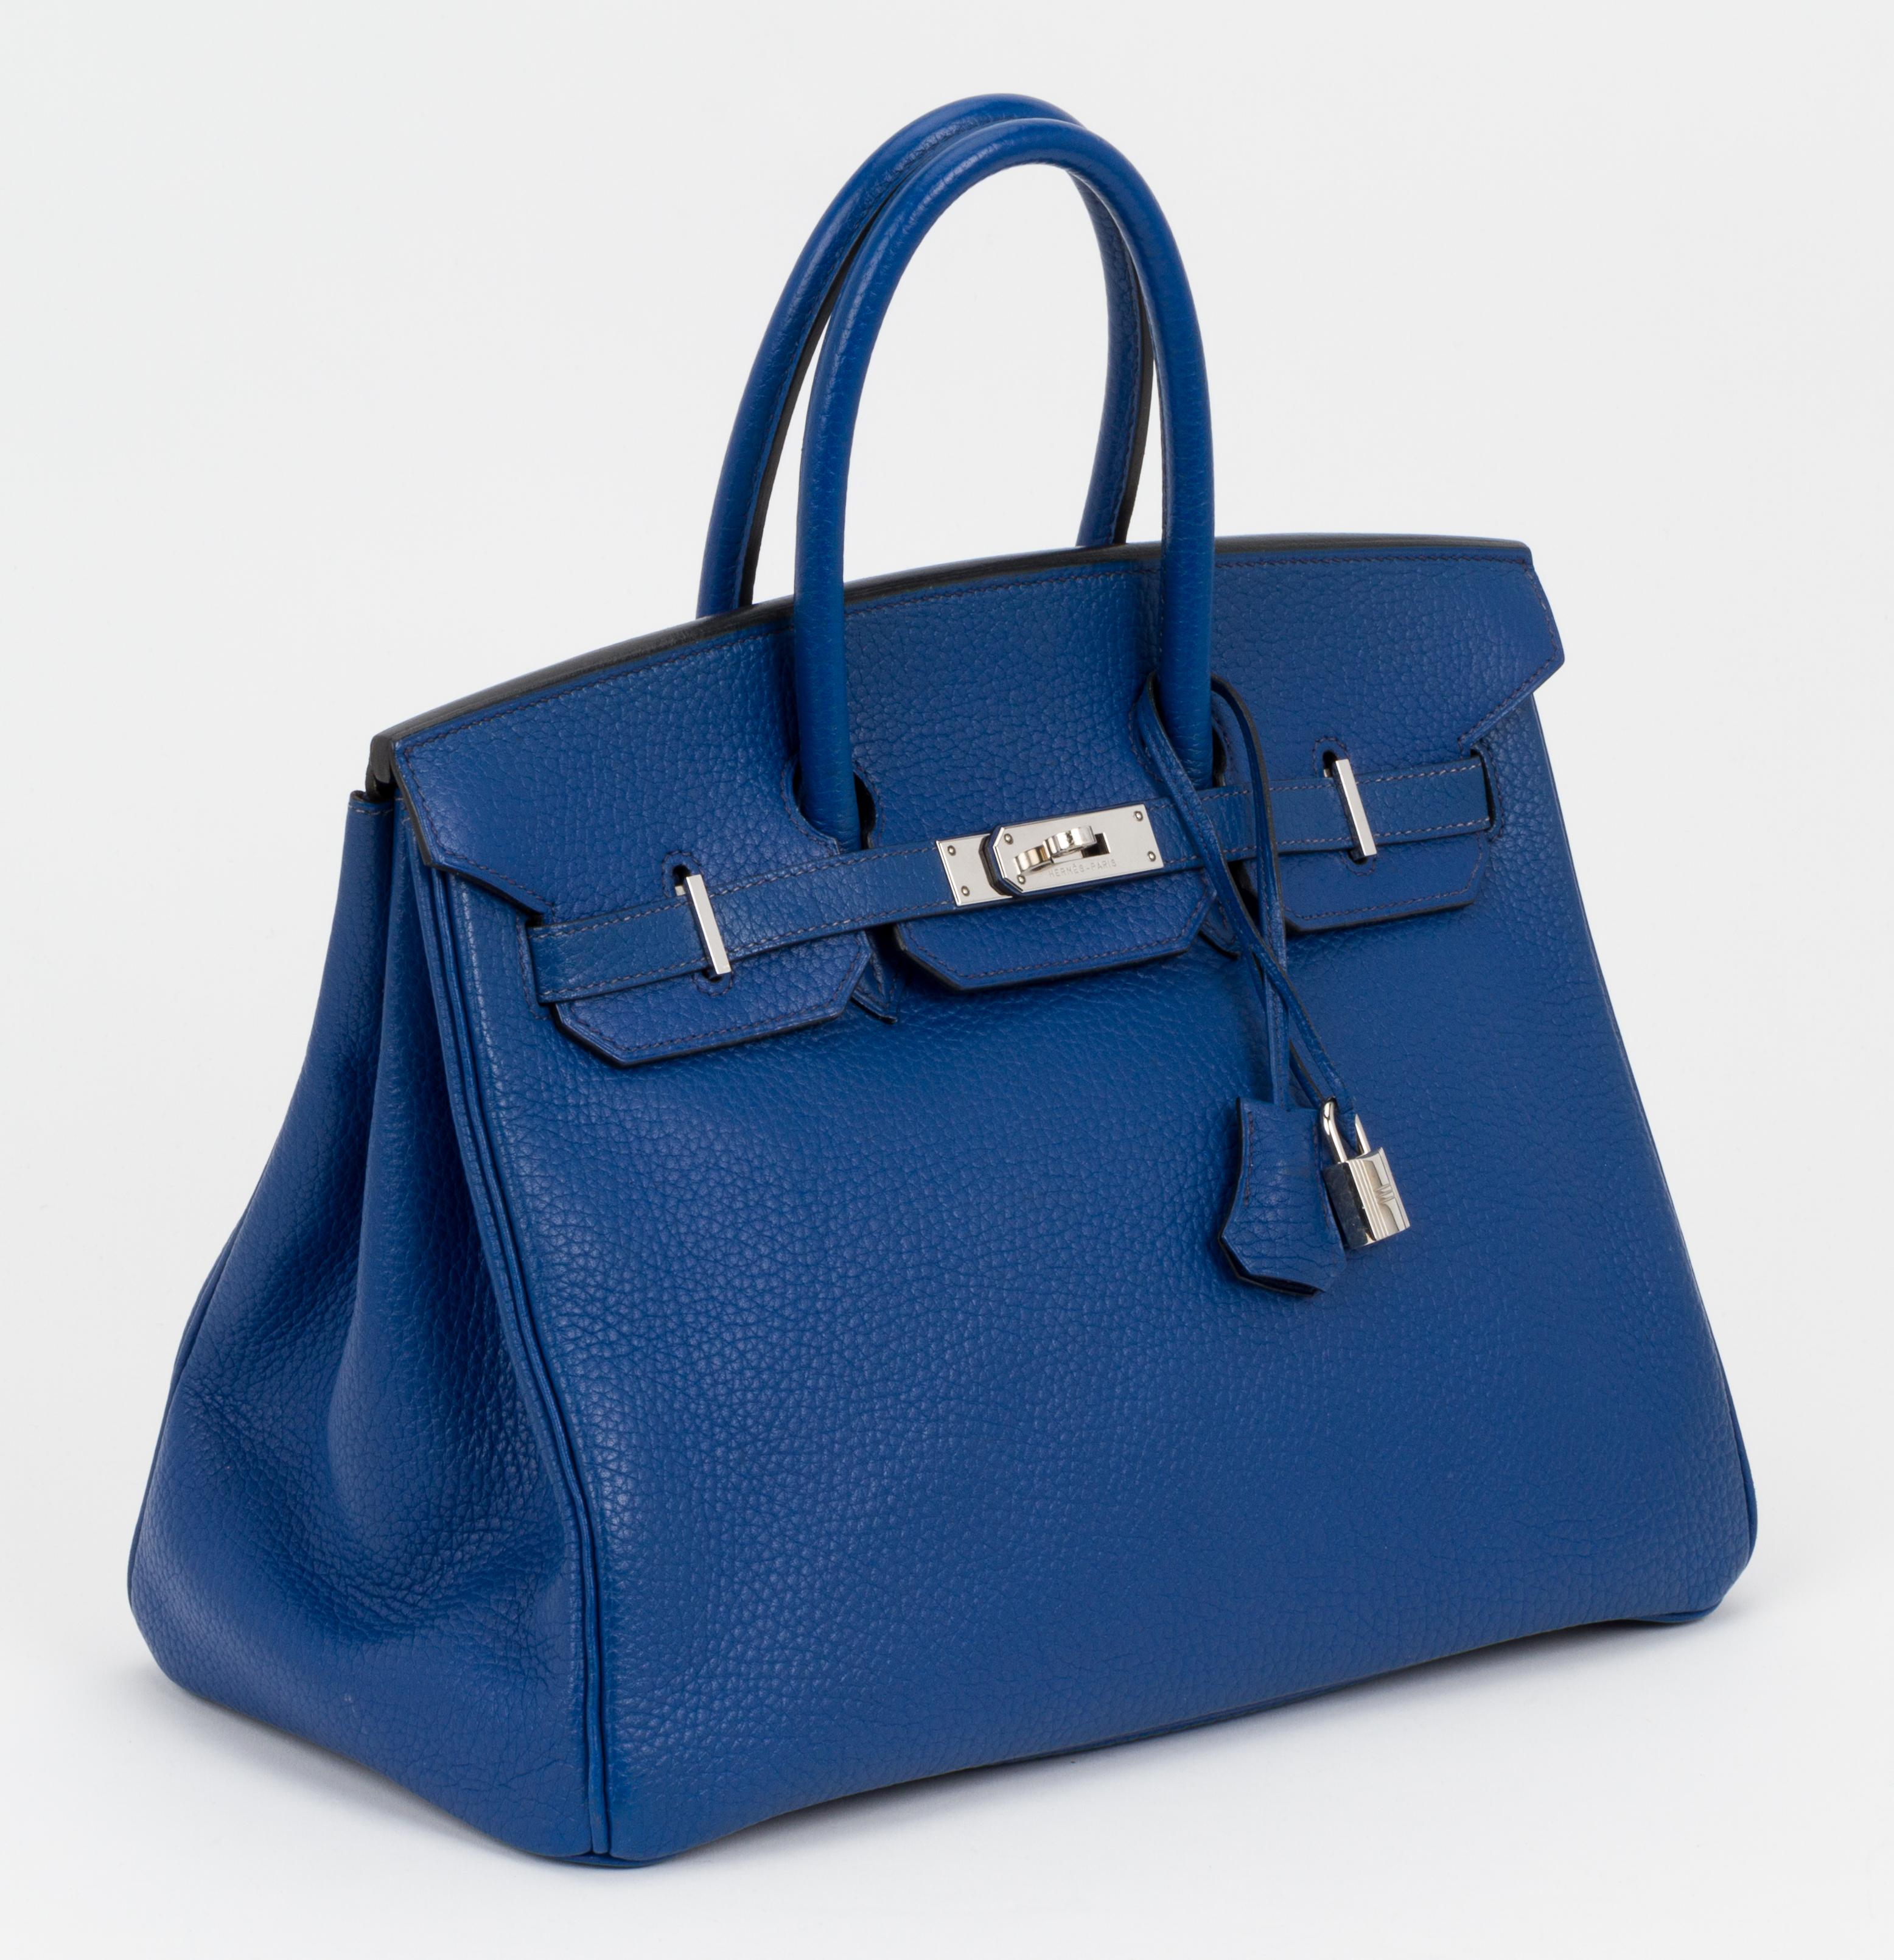 Hermès Birkin 35 cm preowned in blue de France togo leather and silver tone hardware. Very good condition, except for a few scratches on metal plates and loose turn lock. Handle drop, 4